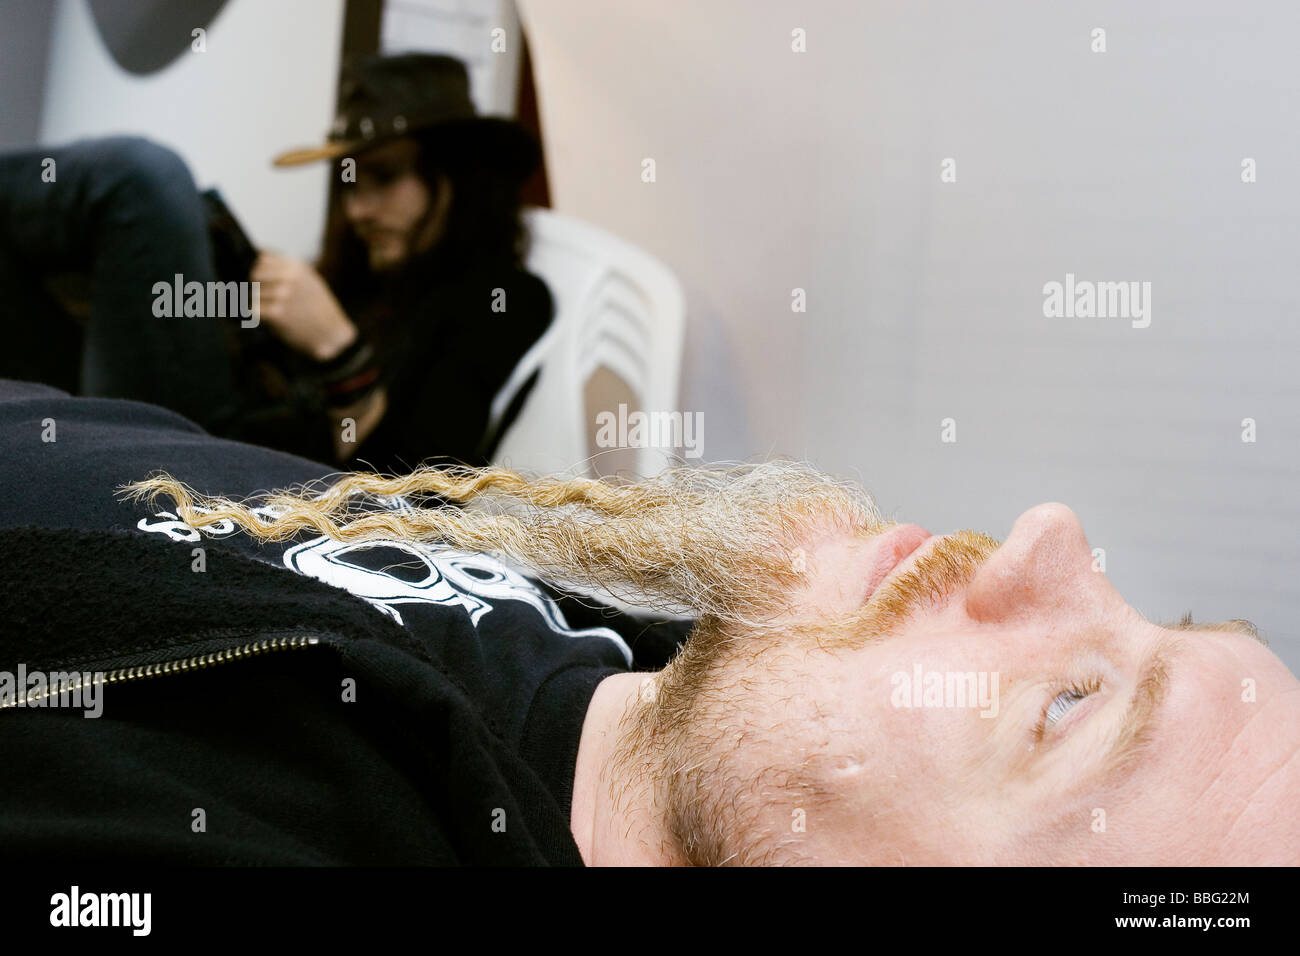 At backstage on Nightwish (a Finnish metal band) tour in Brazil Stock Photo